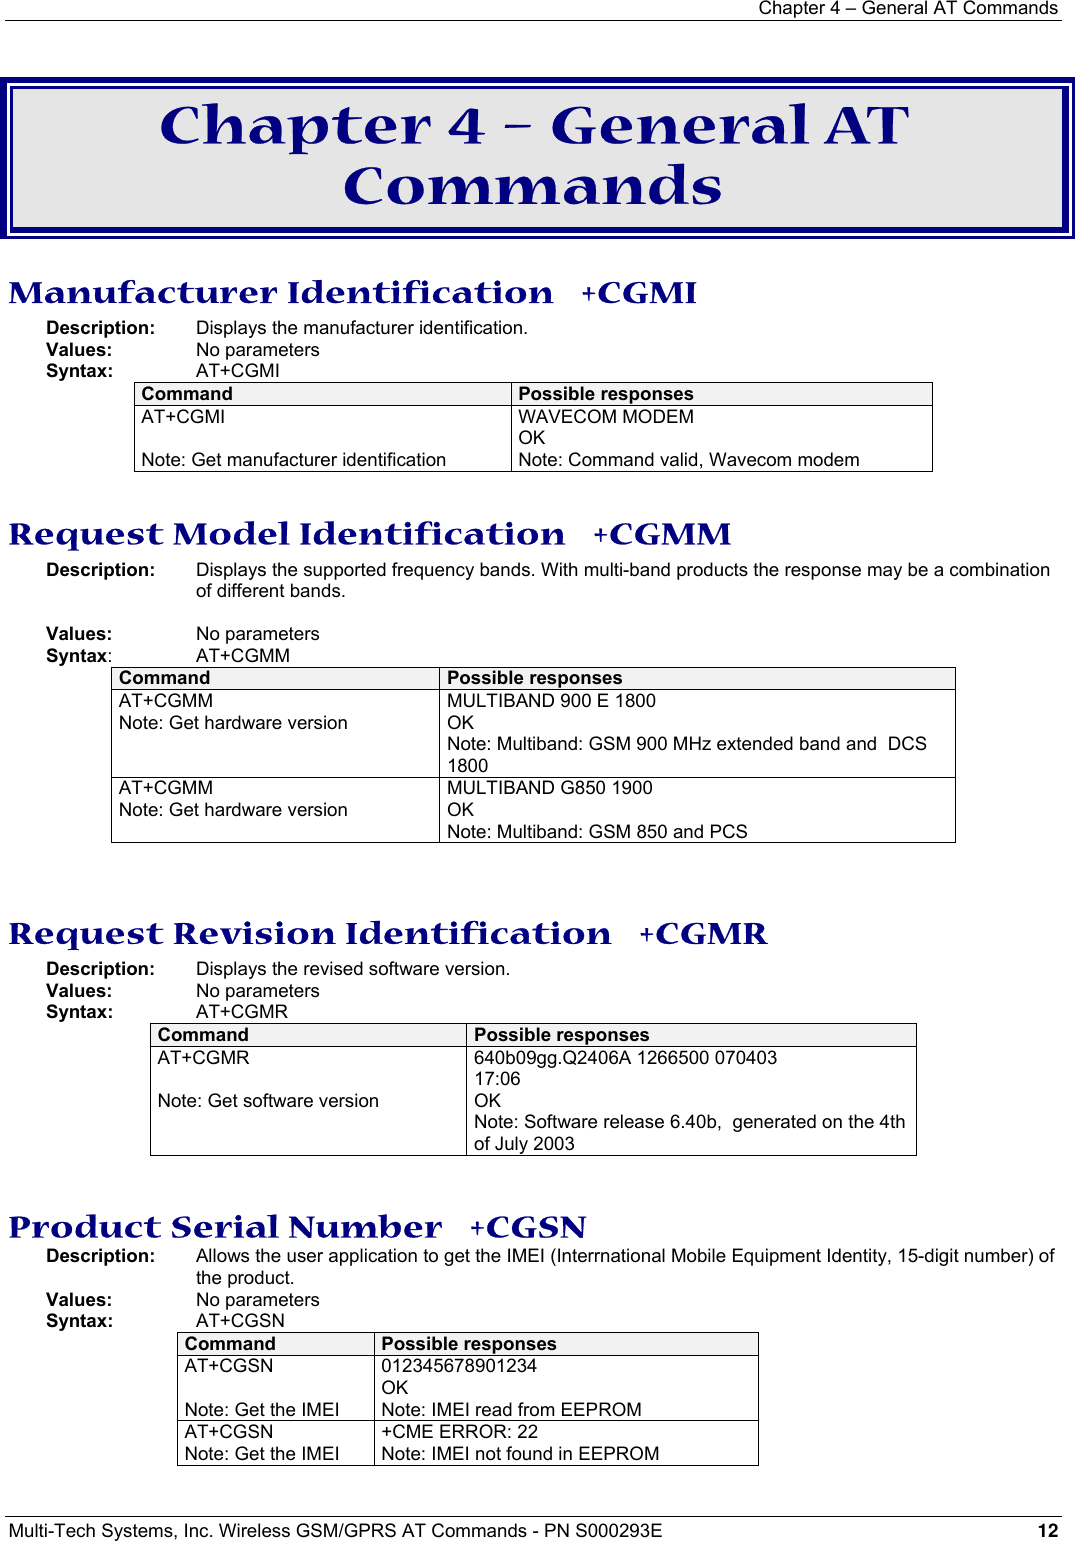 Chapter 4 – General AT Commands Multi-Tech Systems, Inc. Wireless GSM/GPRS AT Commands - PN S000293E 12   Chapter 4 – General AT Commands Manufacturer Identification   +CGMI Description:   Displays the manufacturer identification. Values:    No parameters Syntax: AT+CGMI  Command  Possible responses AT+CGMI  Note: Get manufacturer identification WAVECOM MODEM OK Note: Command valid, Wavecom modem  Request Model Identification   +CGMM Description:   Displays the supported frequency bands. With multi-band products the response may be a combination of different bands.    Values:    No parameters Syntax: AT+CGMM Command  Possible responses AT+CGMM Note: Get hardware version MULTIBAND 900 E 1800 OK Note: Multiband: GSM 900 MHz extended band and  DCS 1800  AT+CGMM Note: Get hardware version MULTIBAND G850 1900 OK Note: Multiband: GSM 850 and PCS   Request Revision Identification   +CGMR Description:    Displays the revised software version. Values:    No parameters Syntax:   AT+CGMR Command  Possible responses AT+CGMR  Note: Get software version 640b09gg.Q2406A 1266500 070403 17:06 OK Note: Software release 6.40b,  generated on the 4th of July 2003   Product Serial Number   +CGSN Description:  Allows the user application to get the IMEI (Interrnational Mobile Equipment Identity, 15-digit number) of the product.  Values:    No parameters Syntax:    AT+CGSN Command  Possible responses AT+CGSN  Note: Get the IMEI 012345678901234 OK Note: IMEI read from EEPROM AT+CGSN Note: Get the IMEI +CME ERROR: 22 Note: IMEI not found in EEPROM  